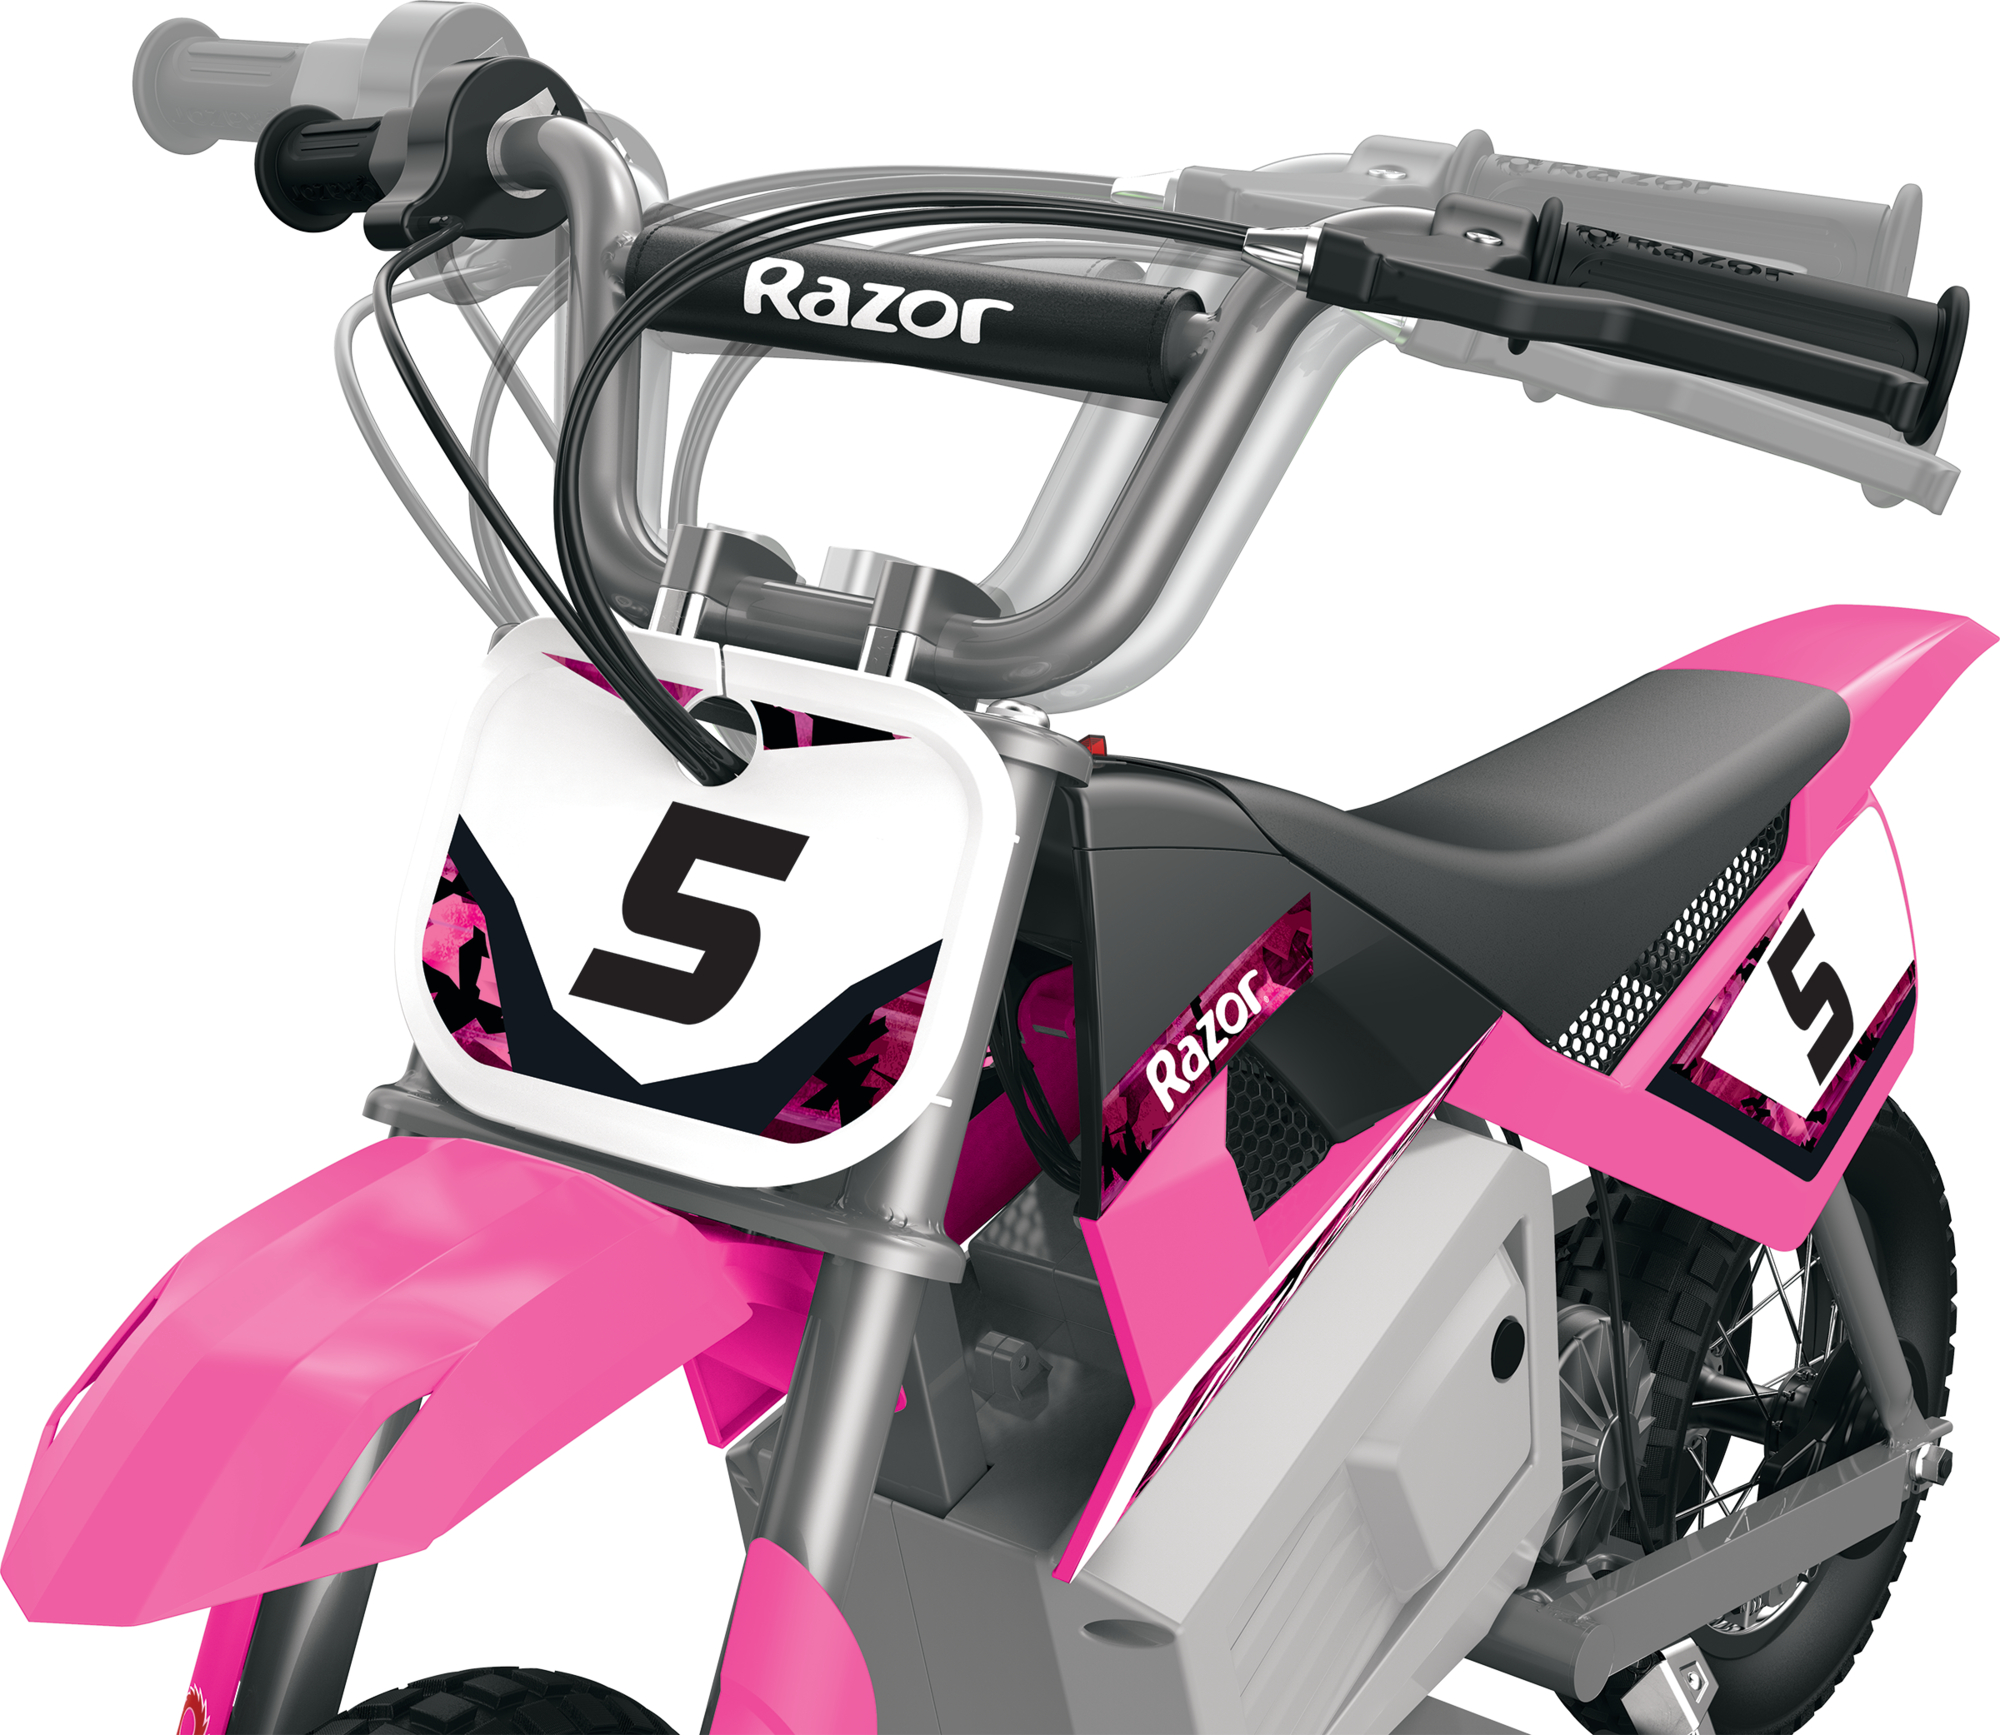 Razor Dirt Rocket MX350 - Pink, up to 14 mph, 24V Electric-Powered Dirt Bike for Kids 13+ - image 3 of 10